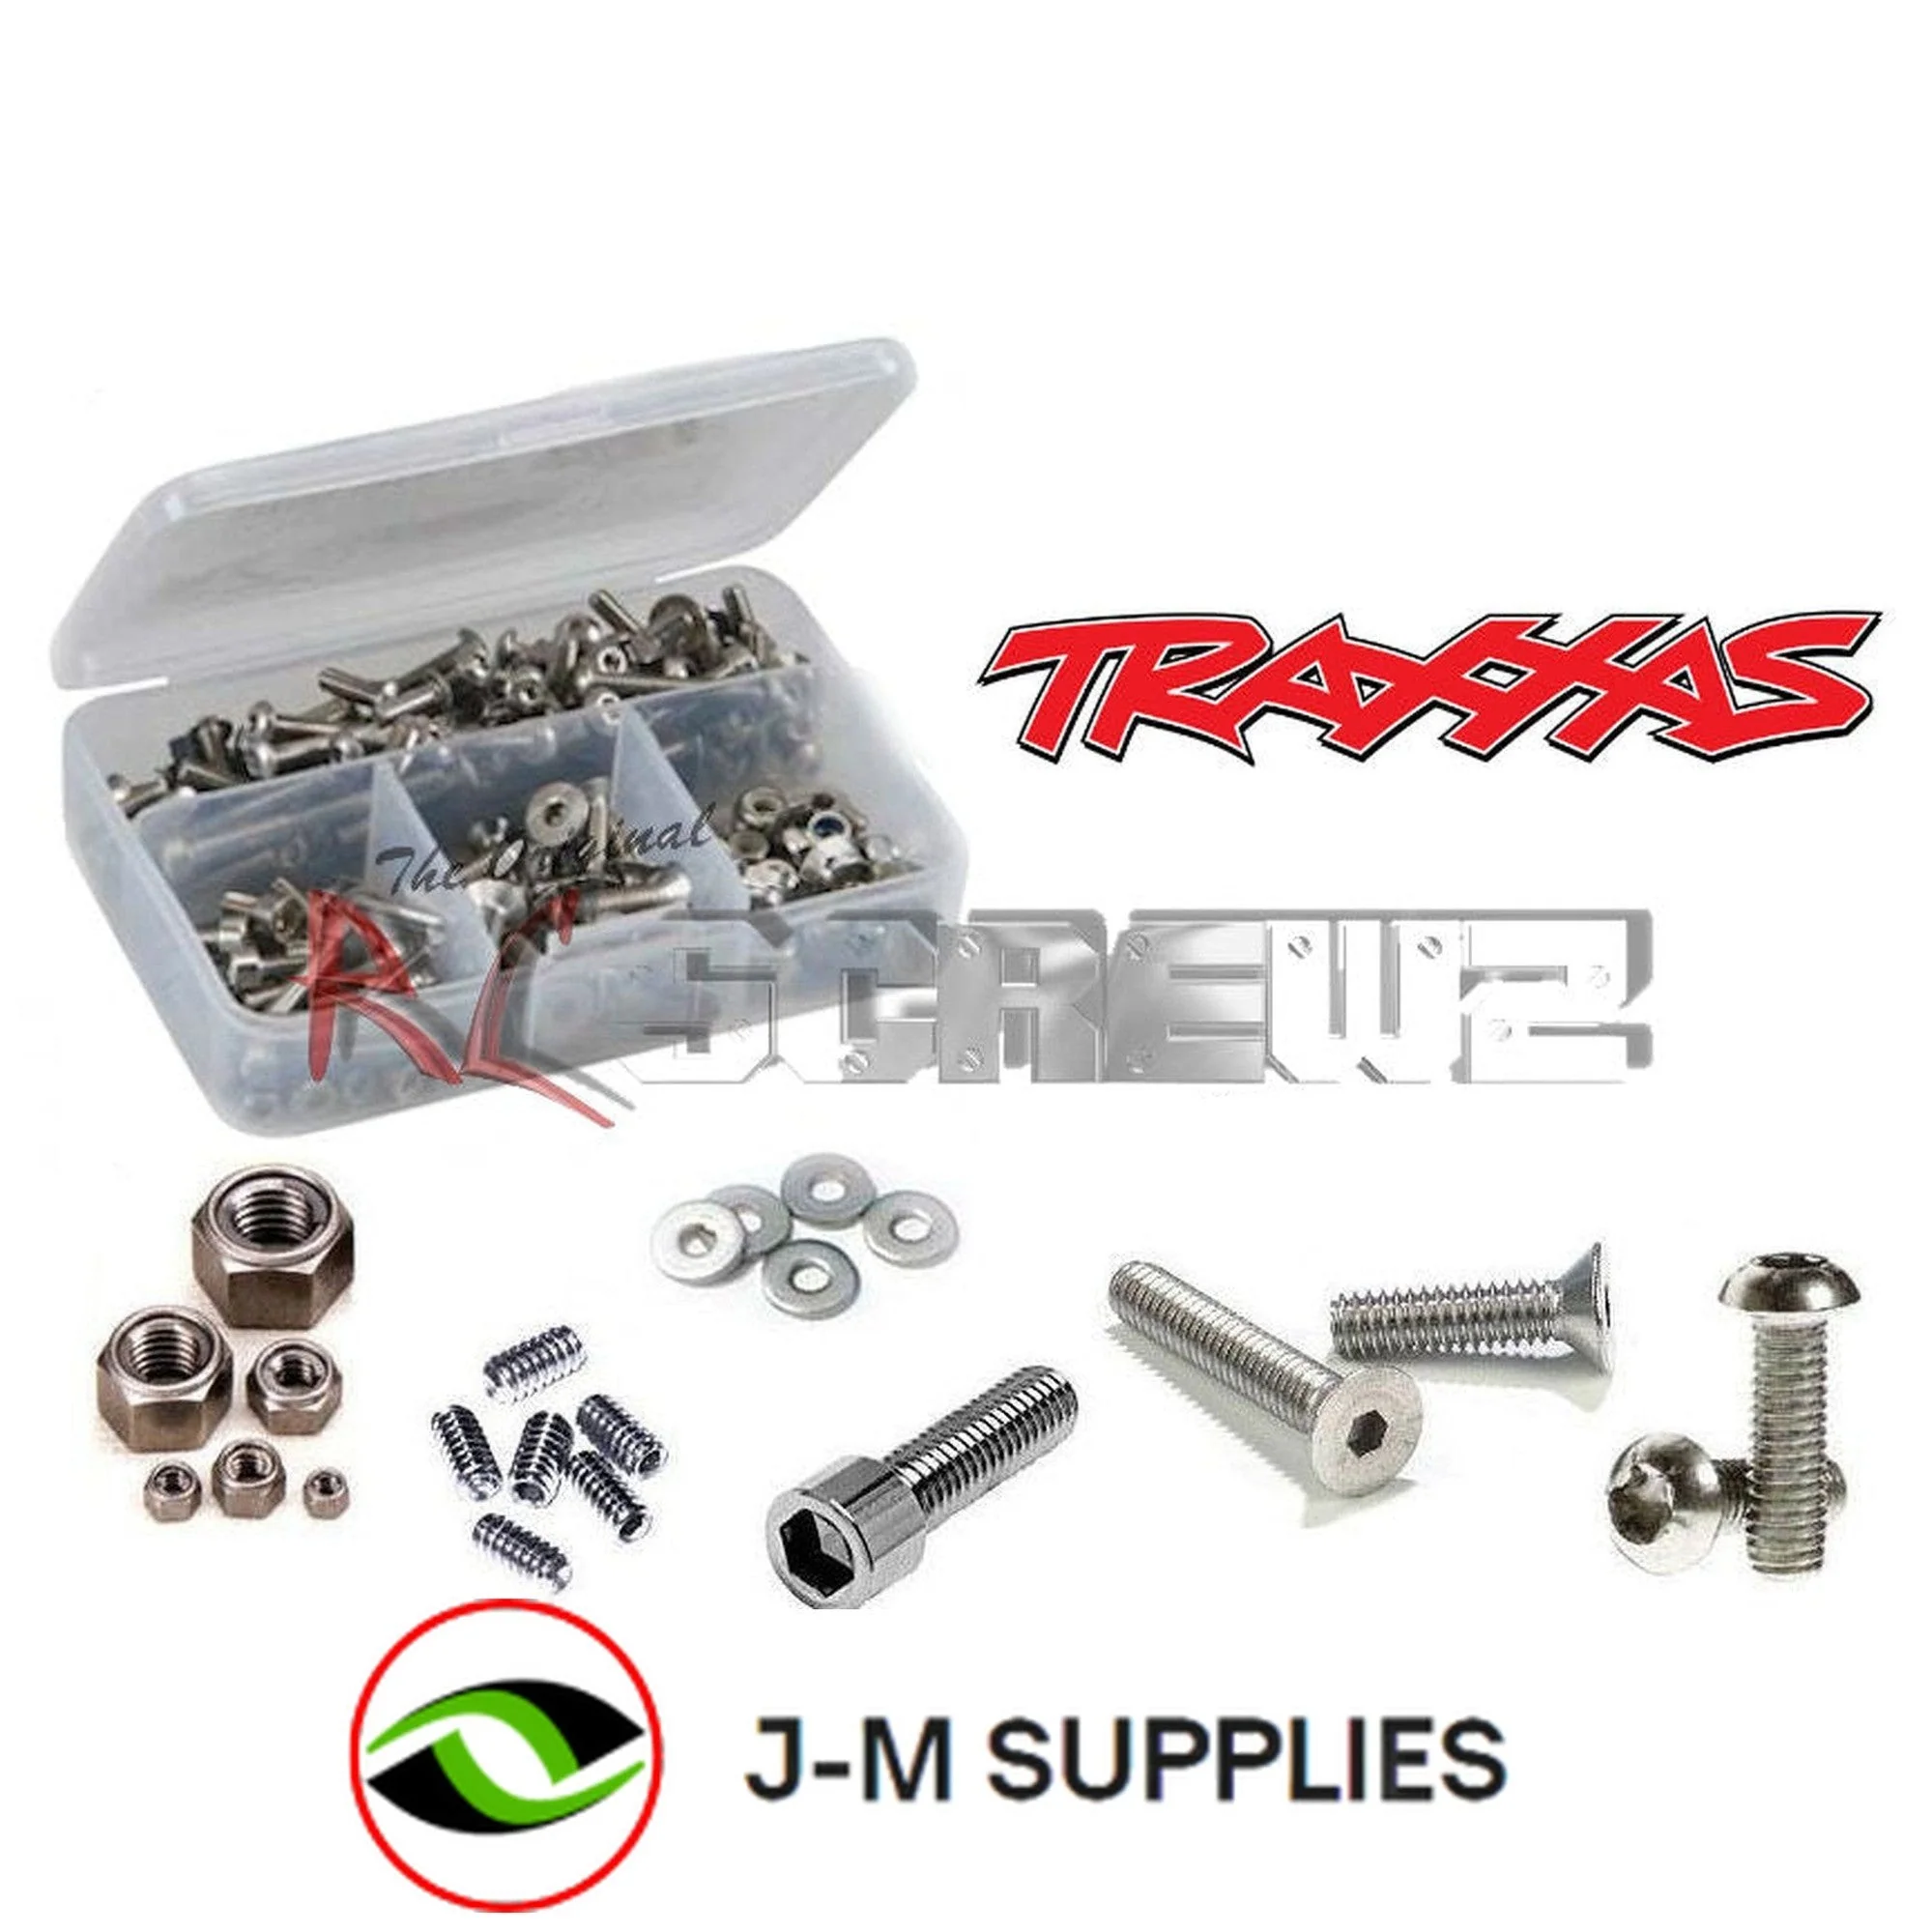 RCScrewZ Stainless Steel Screw Kit tra096 for Traxxas TRX-3 Buggy 1/10th #2603 - Picture 1 of 12